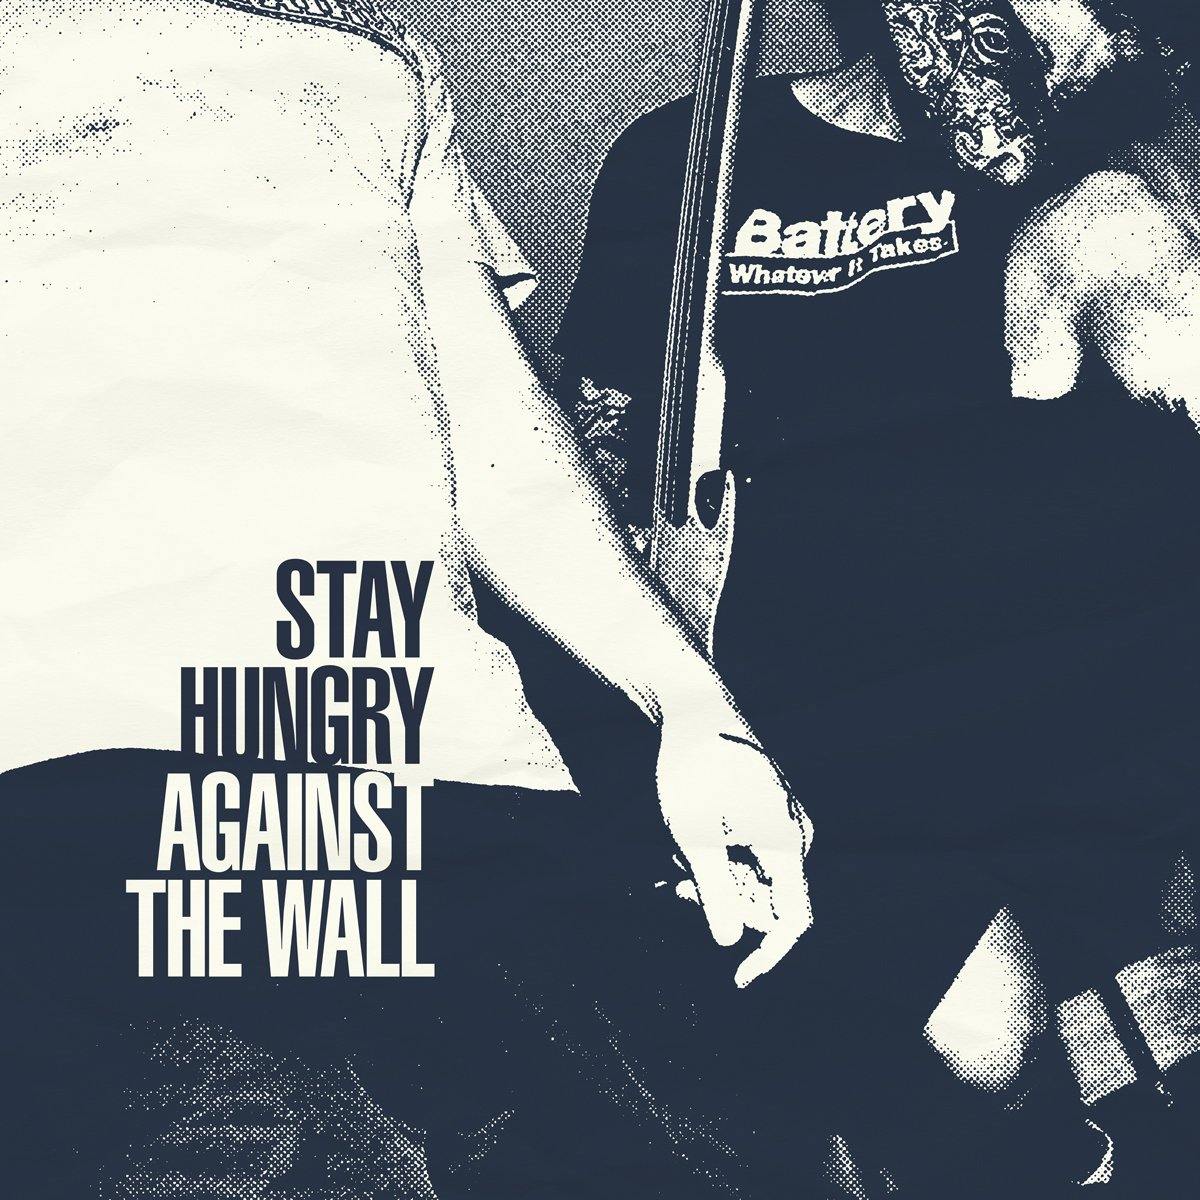 Buy – Stay Hungry 'Against the Wall' Digital Download – Band & Music Merch – Cold Cuts Merch